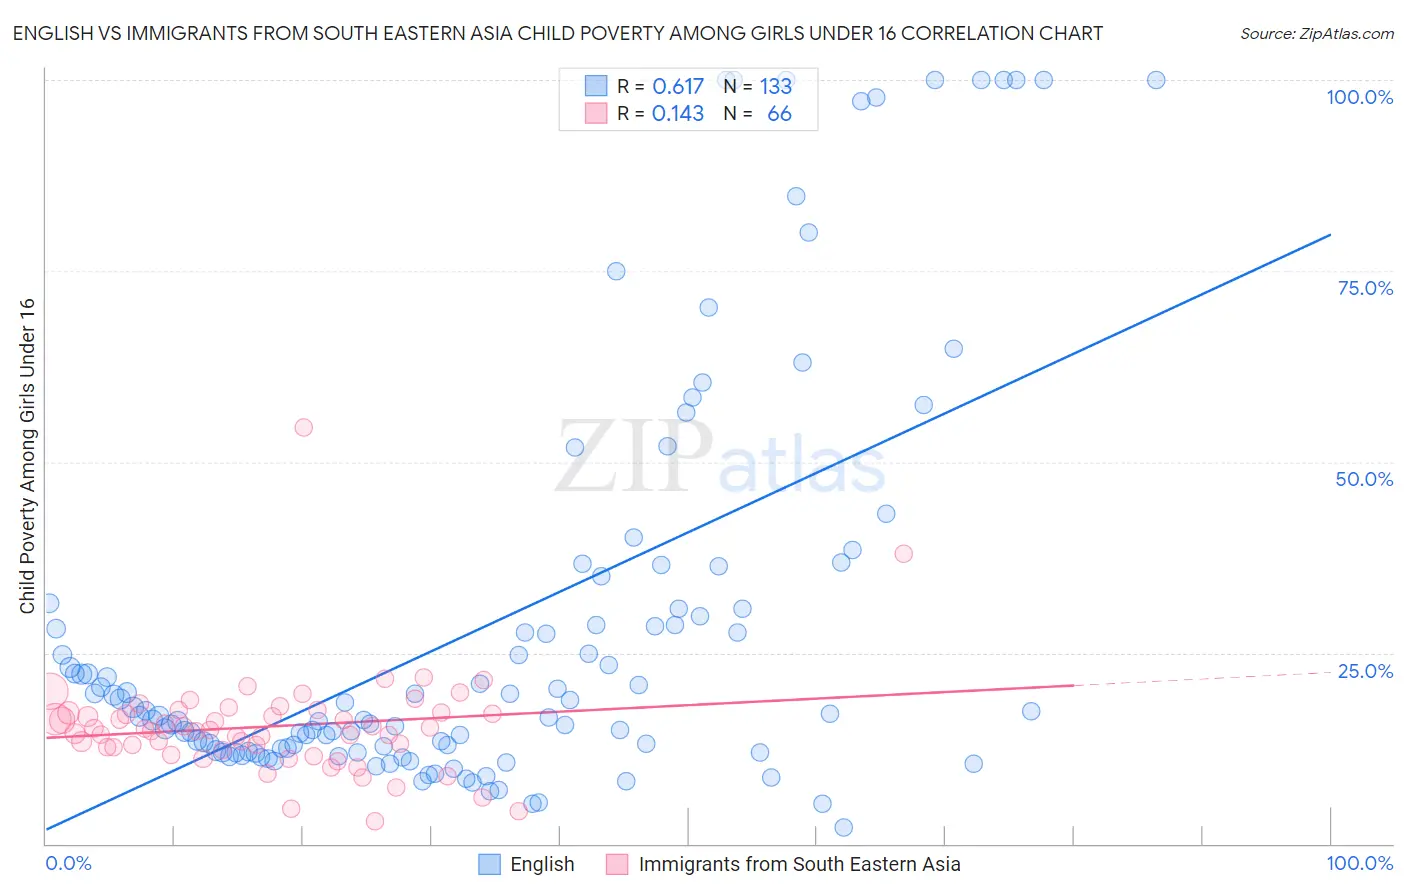 English vs Immigrants from South Eastern Asia Child Poverty Among Girls Under 16